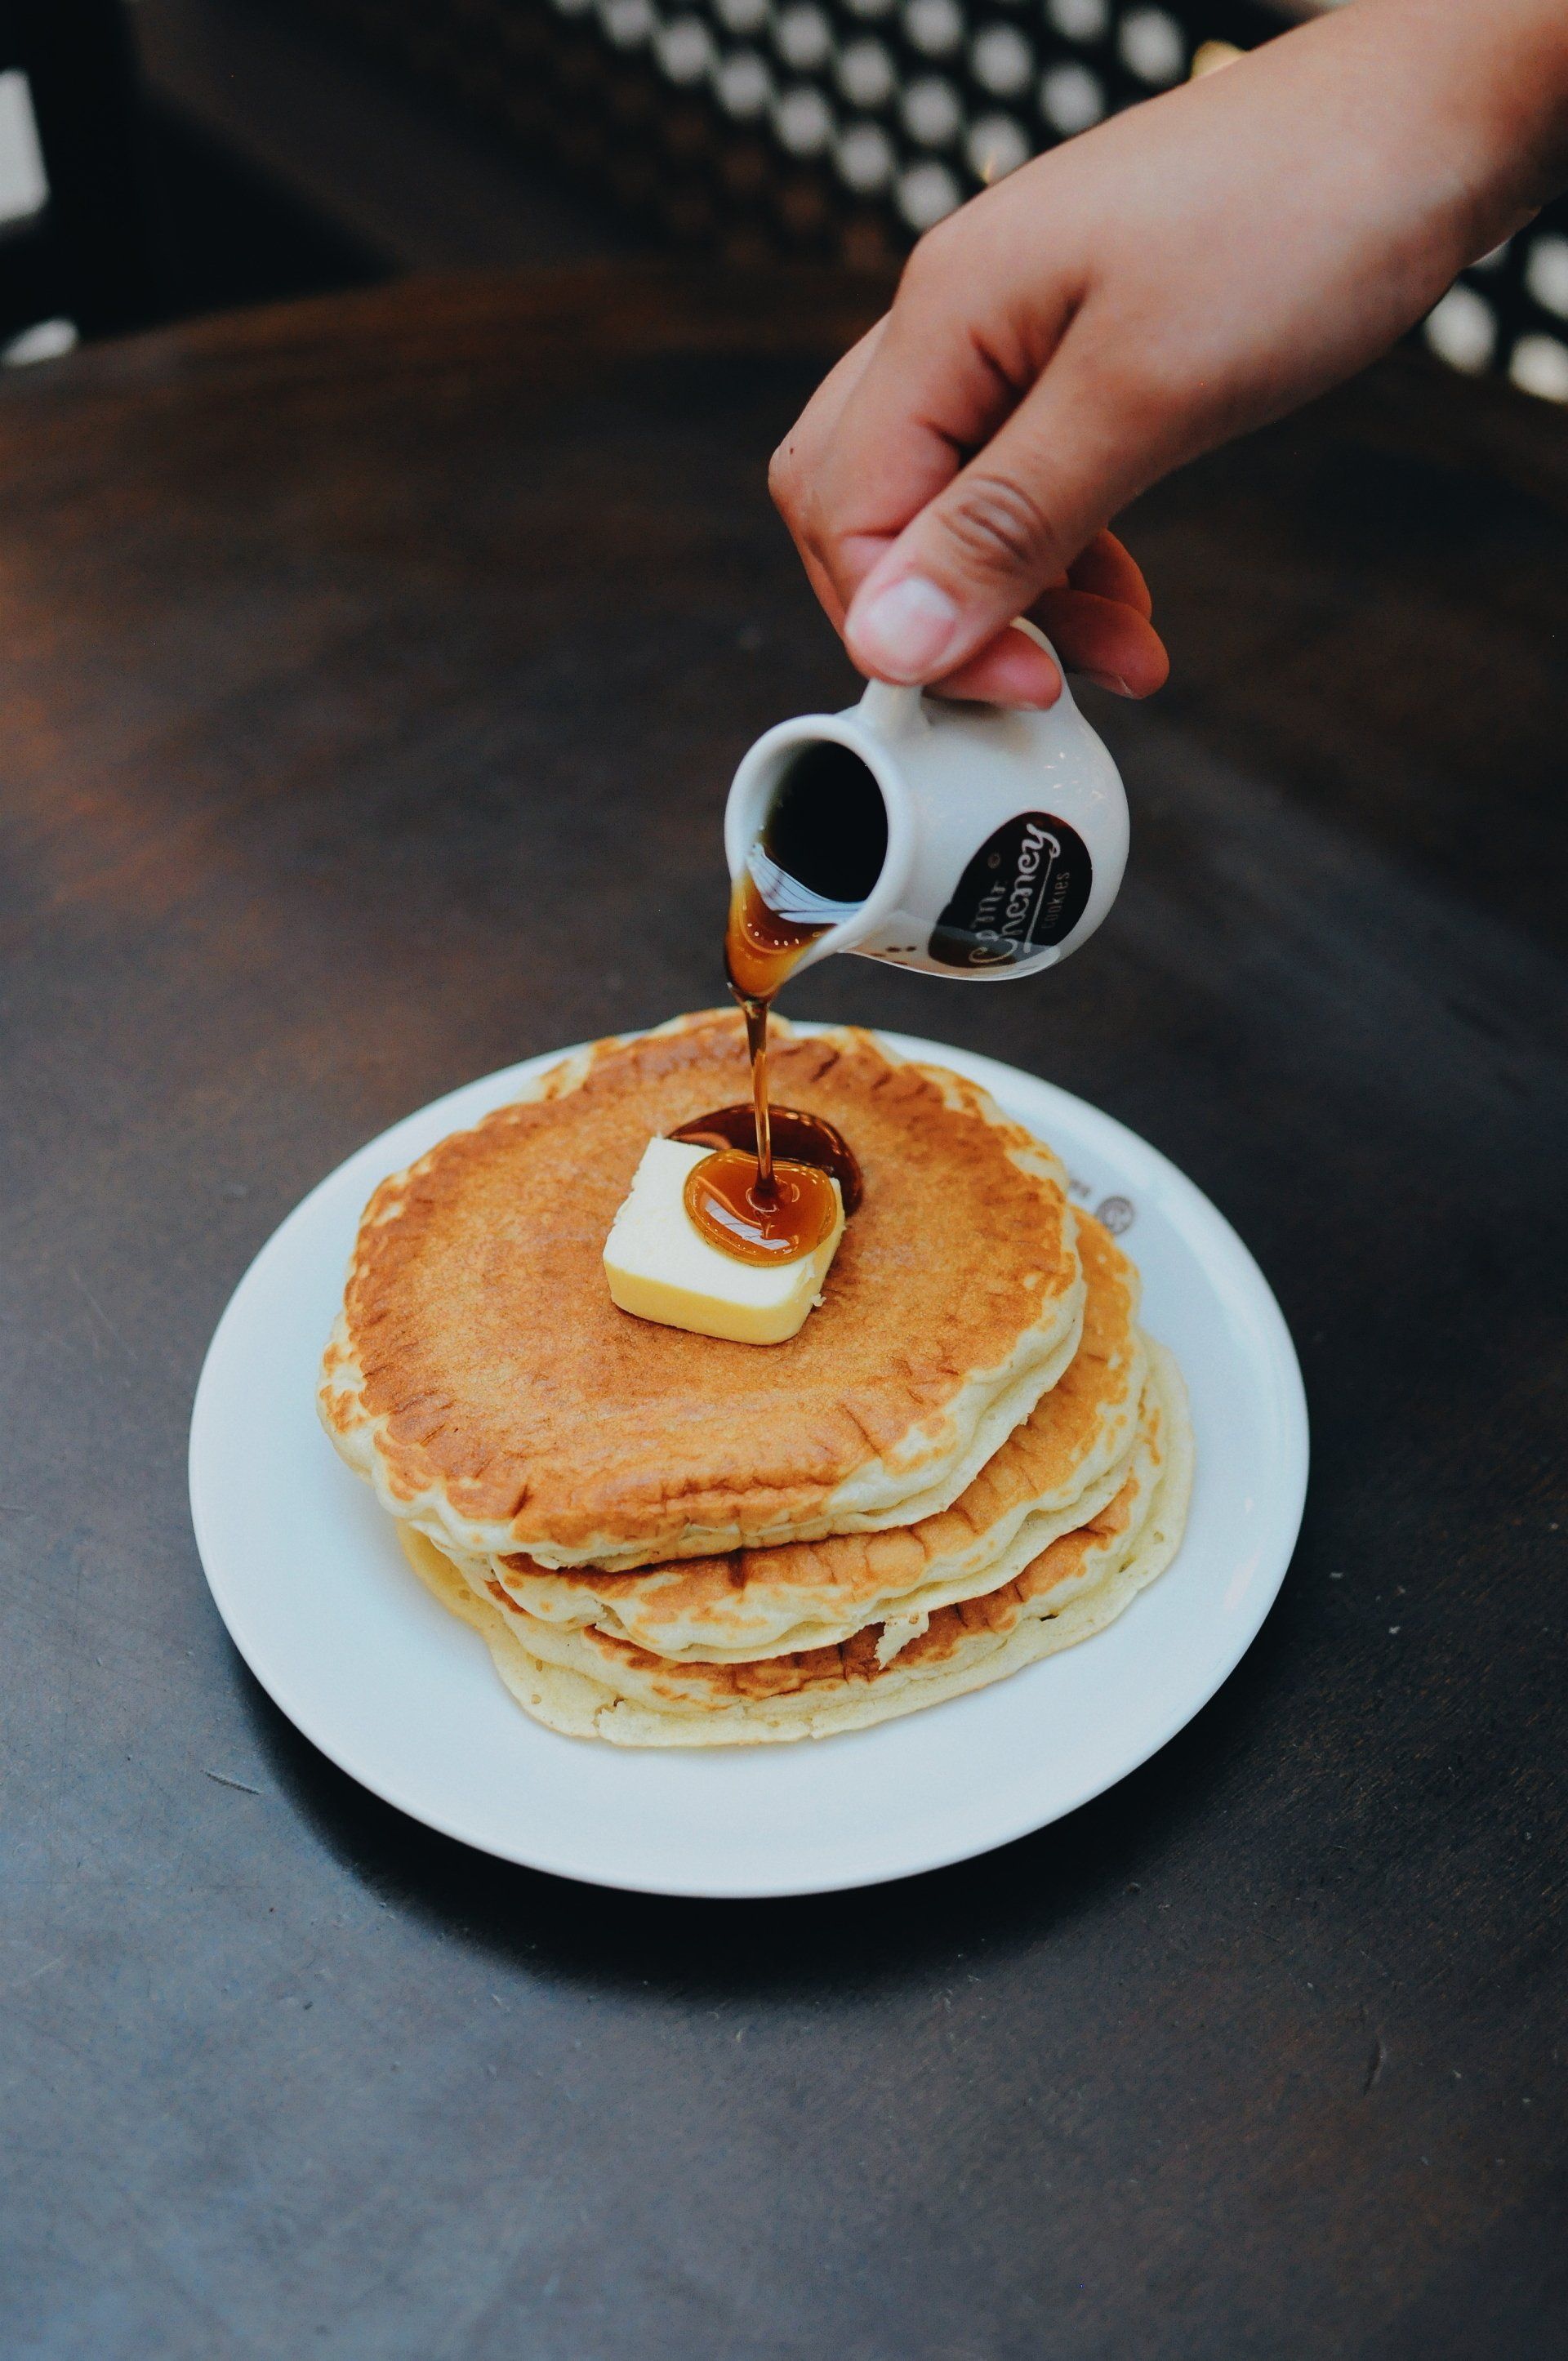 A person is pouring syrup on a stack of pancakes